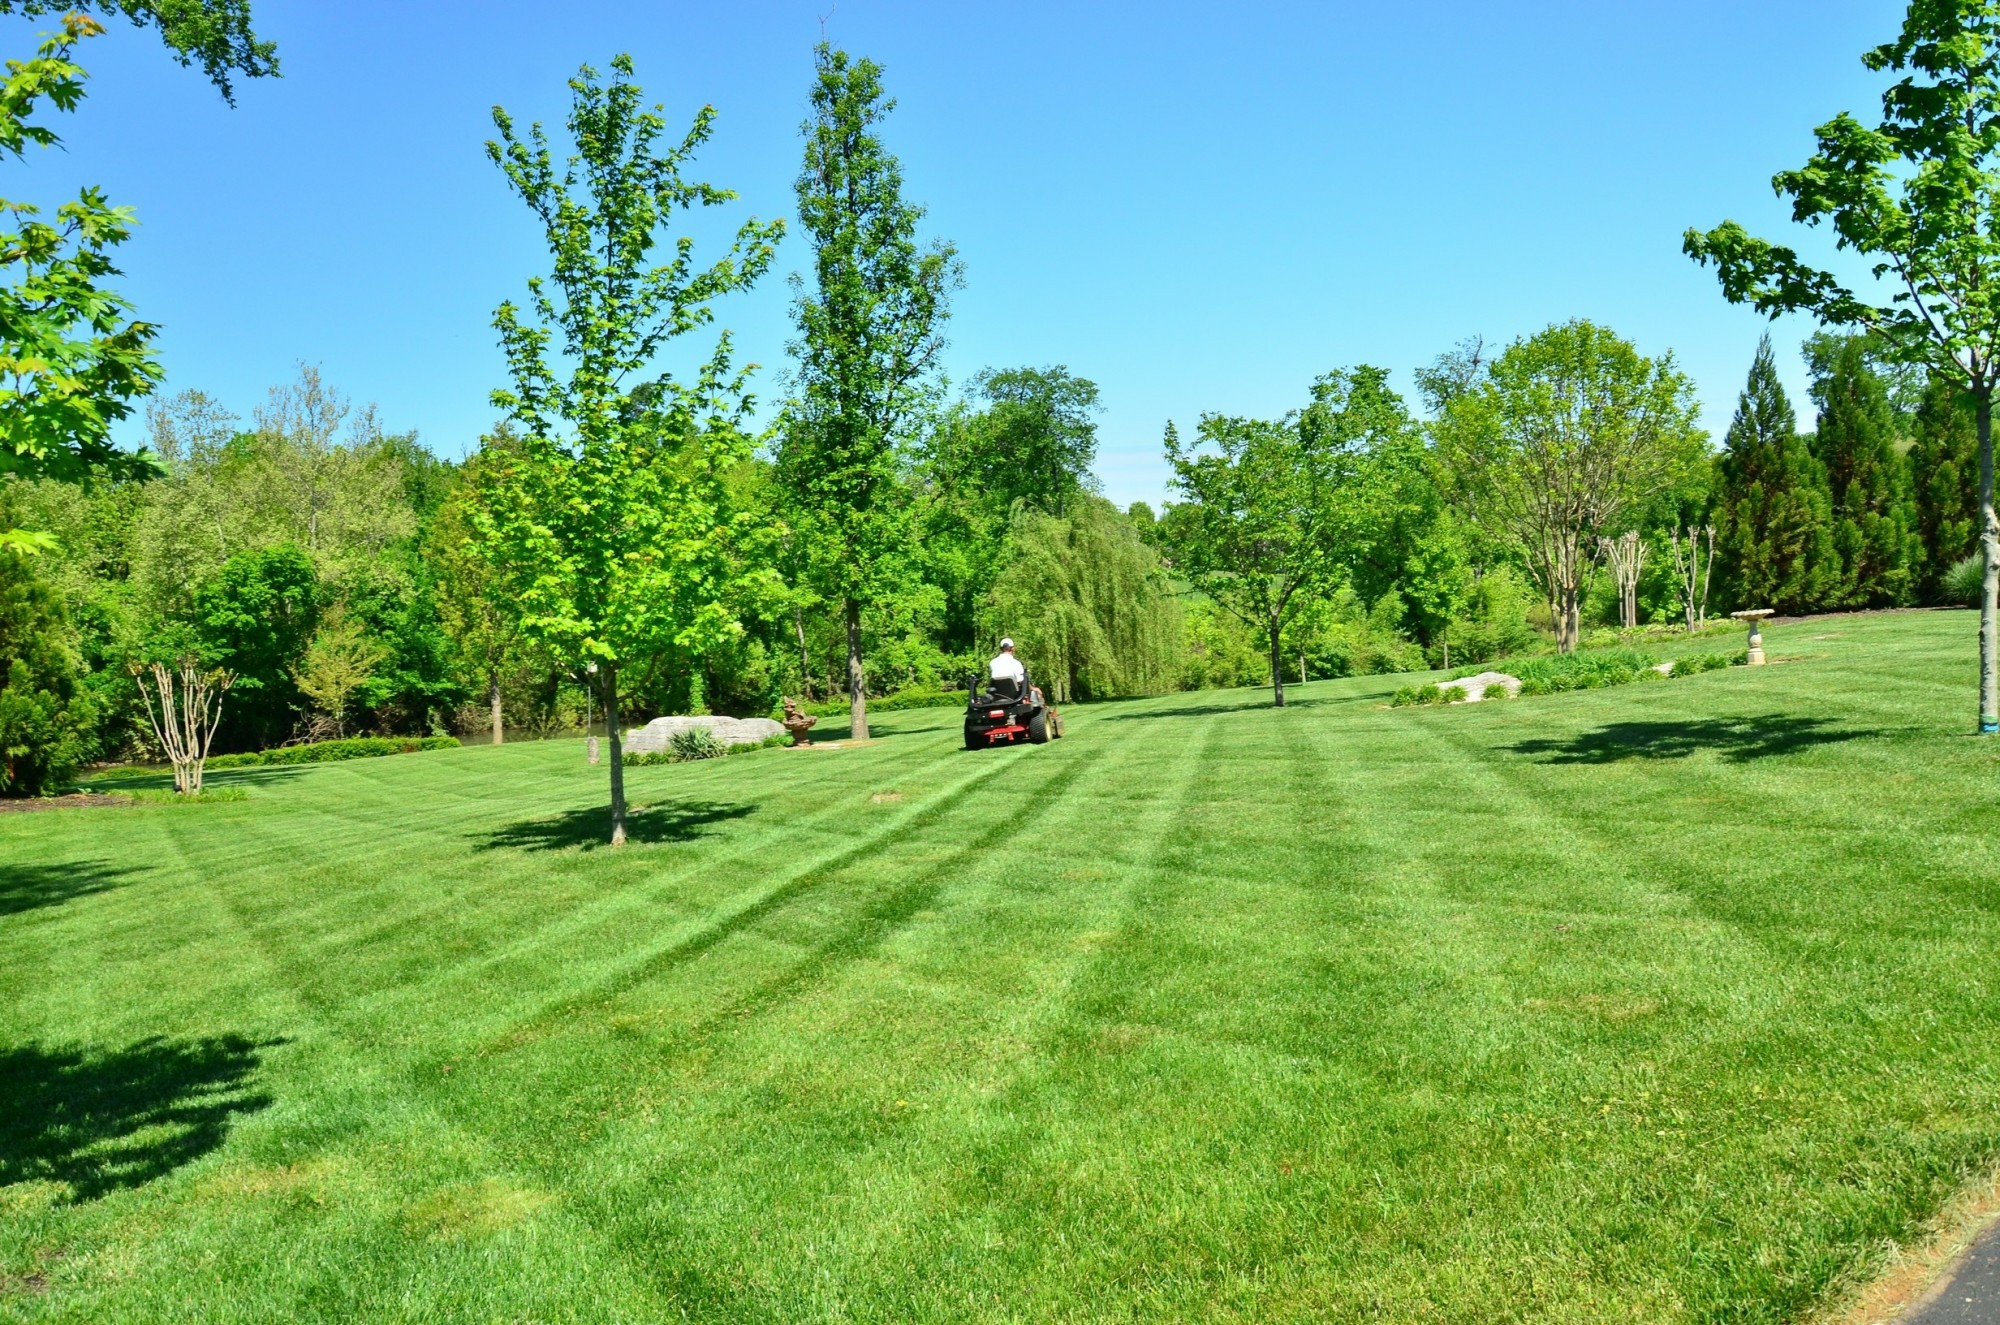 Which Lawn Mowing Pattern Is Right for Your Landscape?